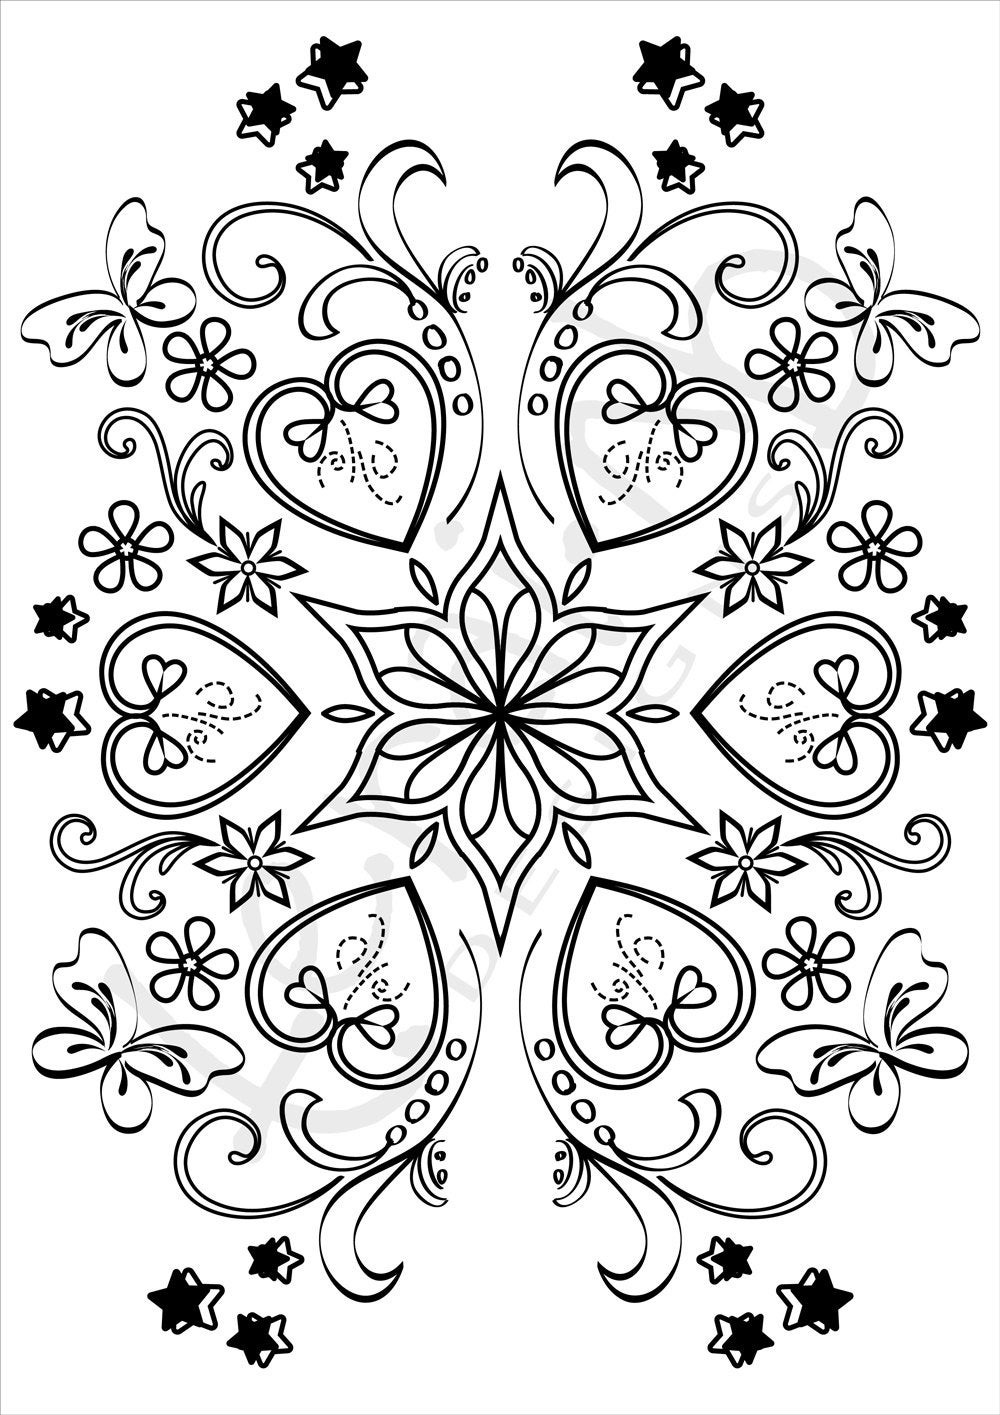 Adult Coloring Pages Heart
 Hearts Colouring page Adult Doodle Art Valentine Colouring